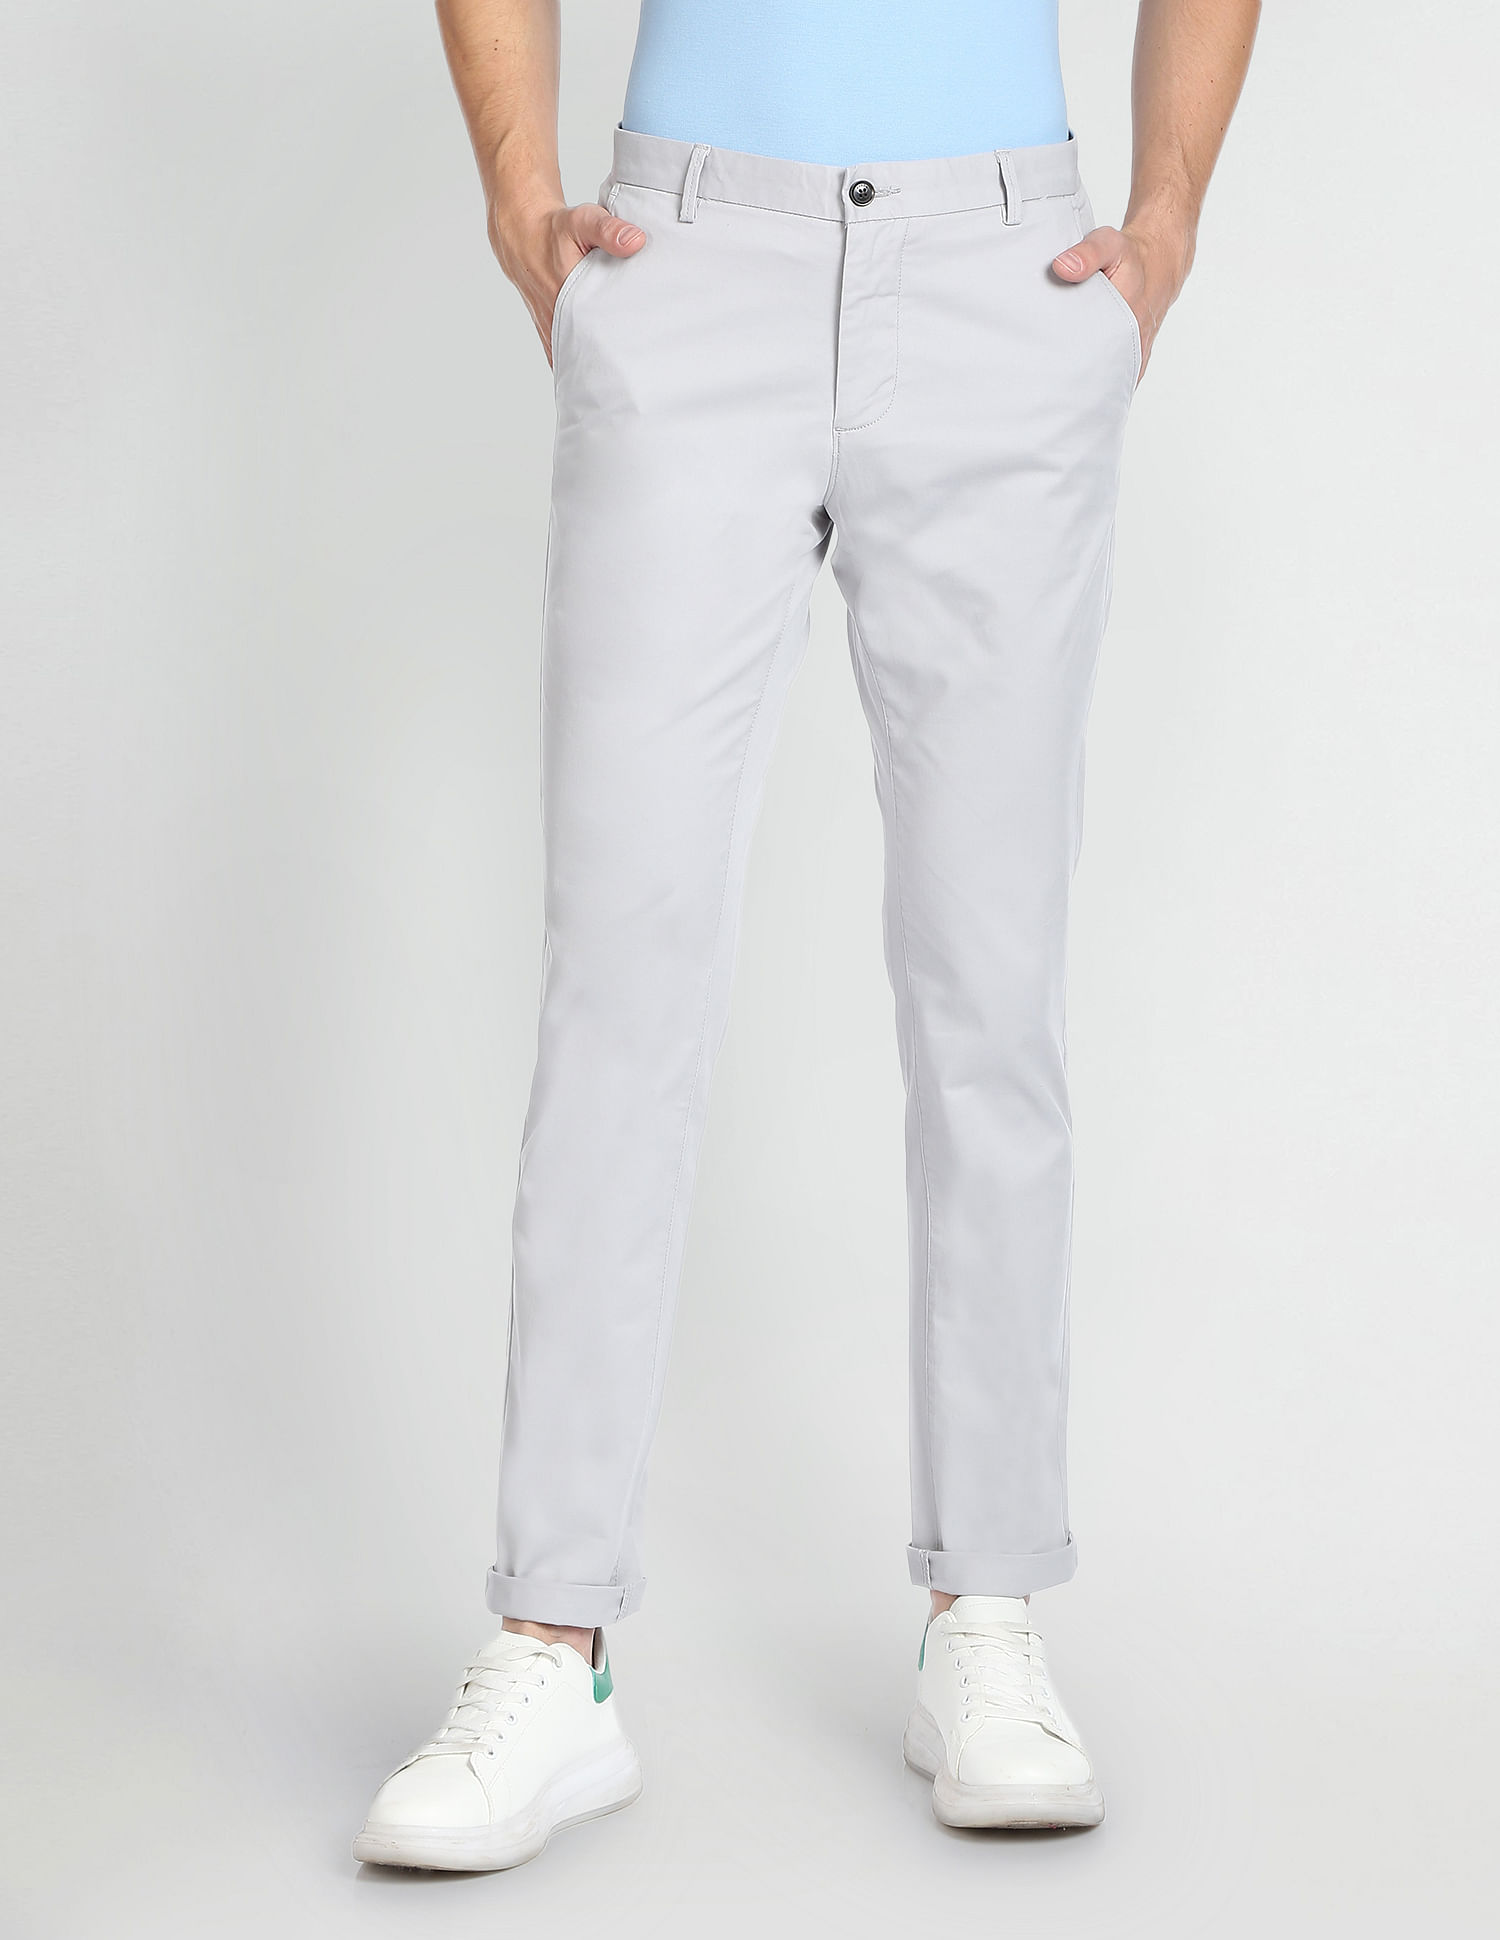 Casual trousers Department 5 - Prince tpences chinos trouser -  UP018461TS0001807002807